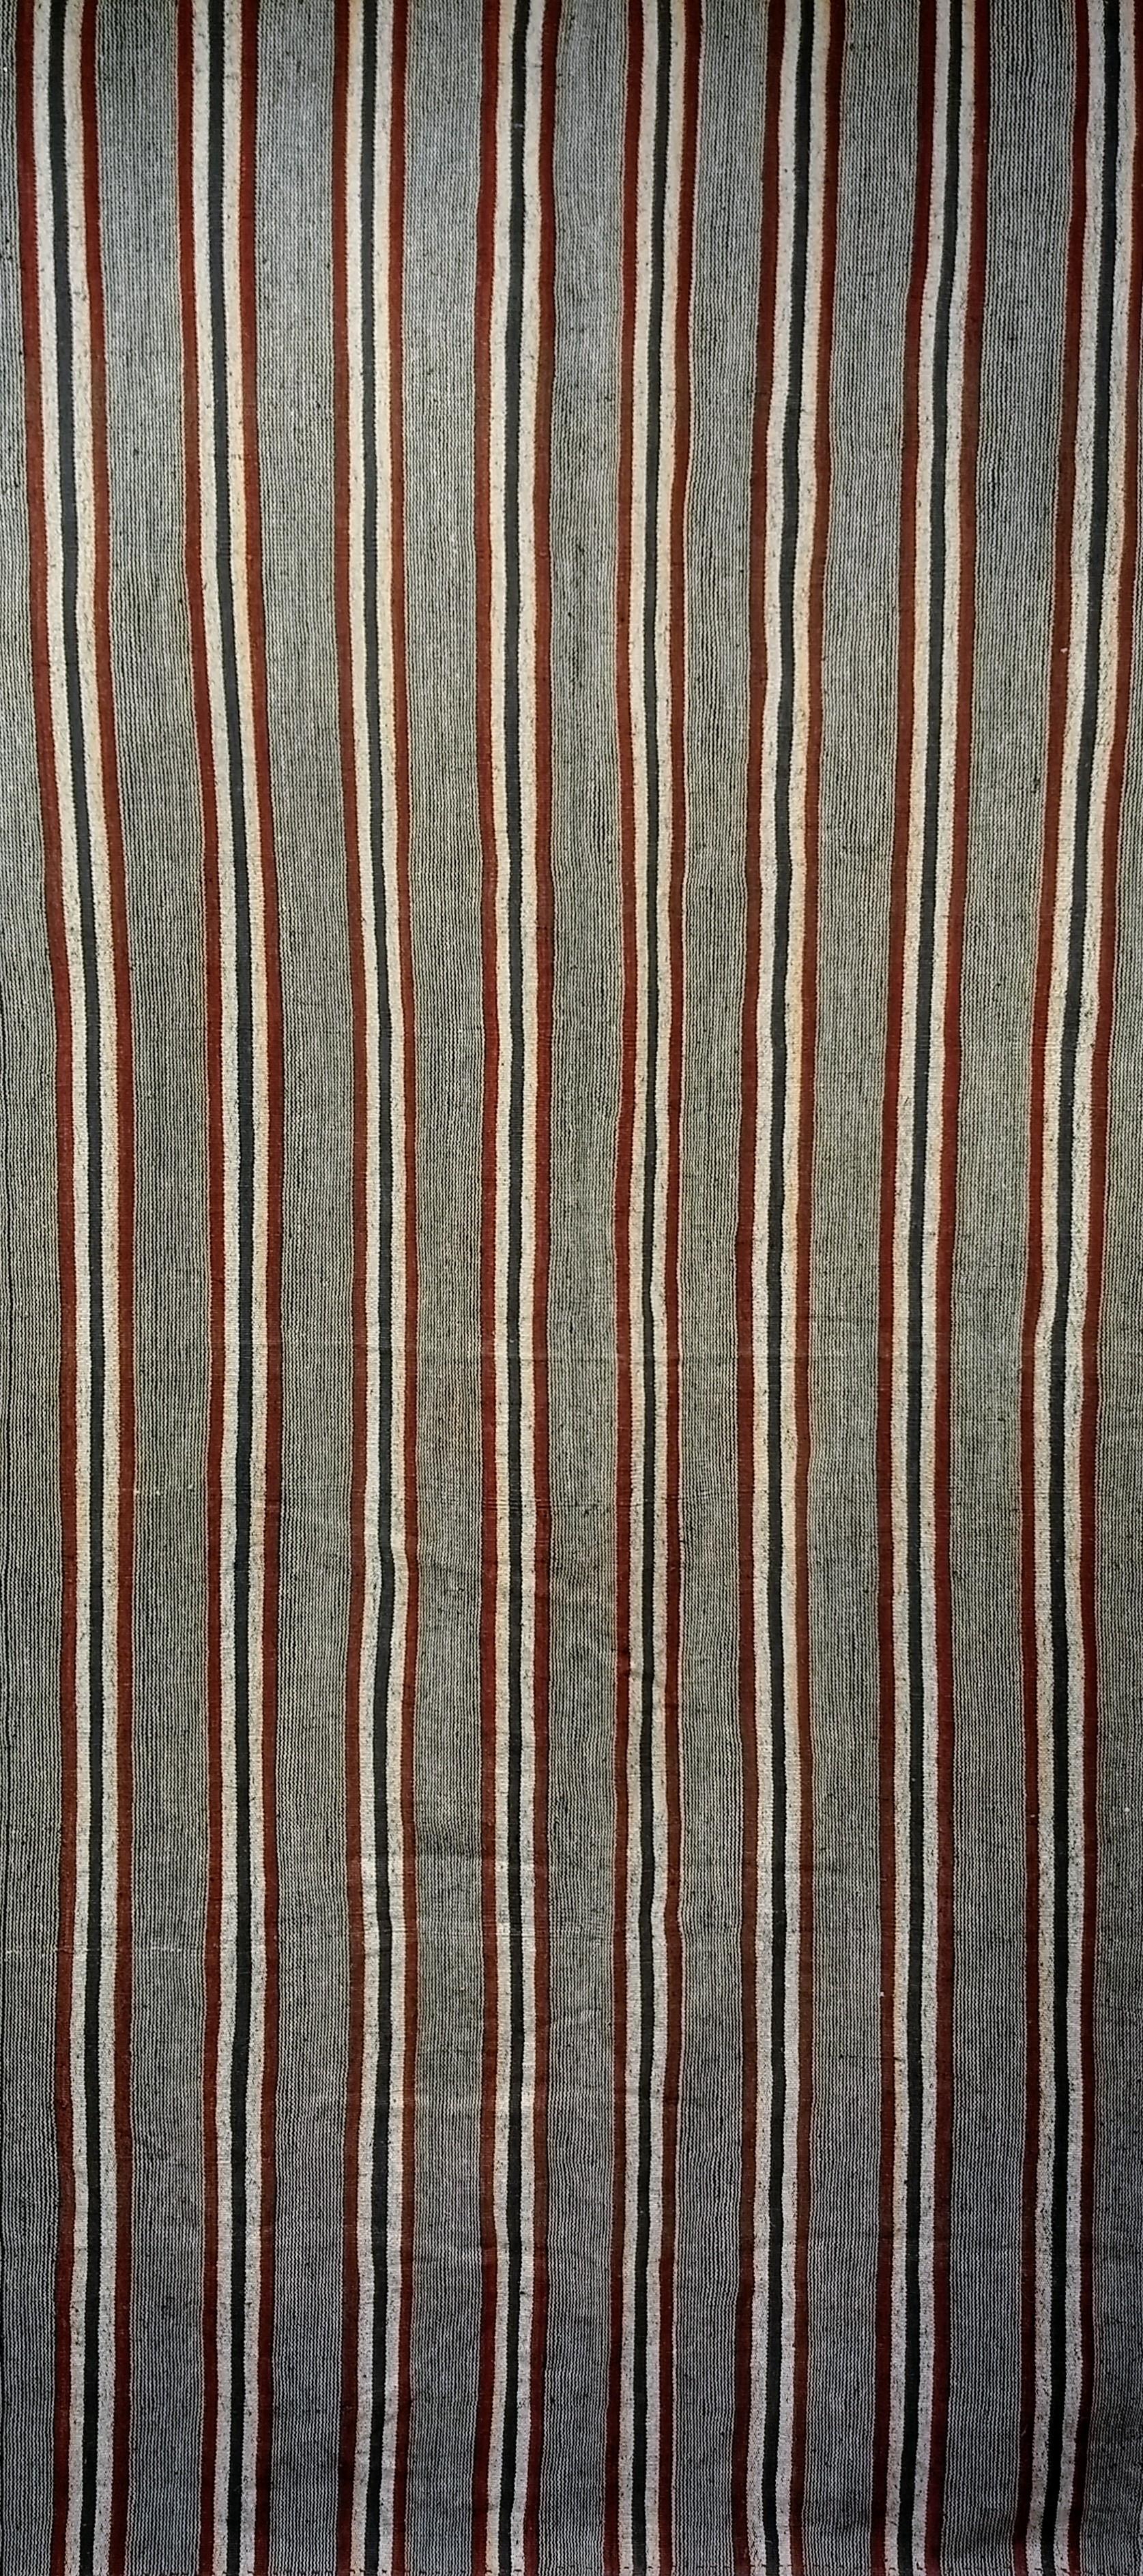 Vintage Turkish Kilim in Allover Stripe Pattern  in Gray, Ivory, Black, Maroon In Good Condition For Sale In Barrington, IL